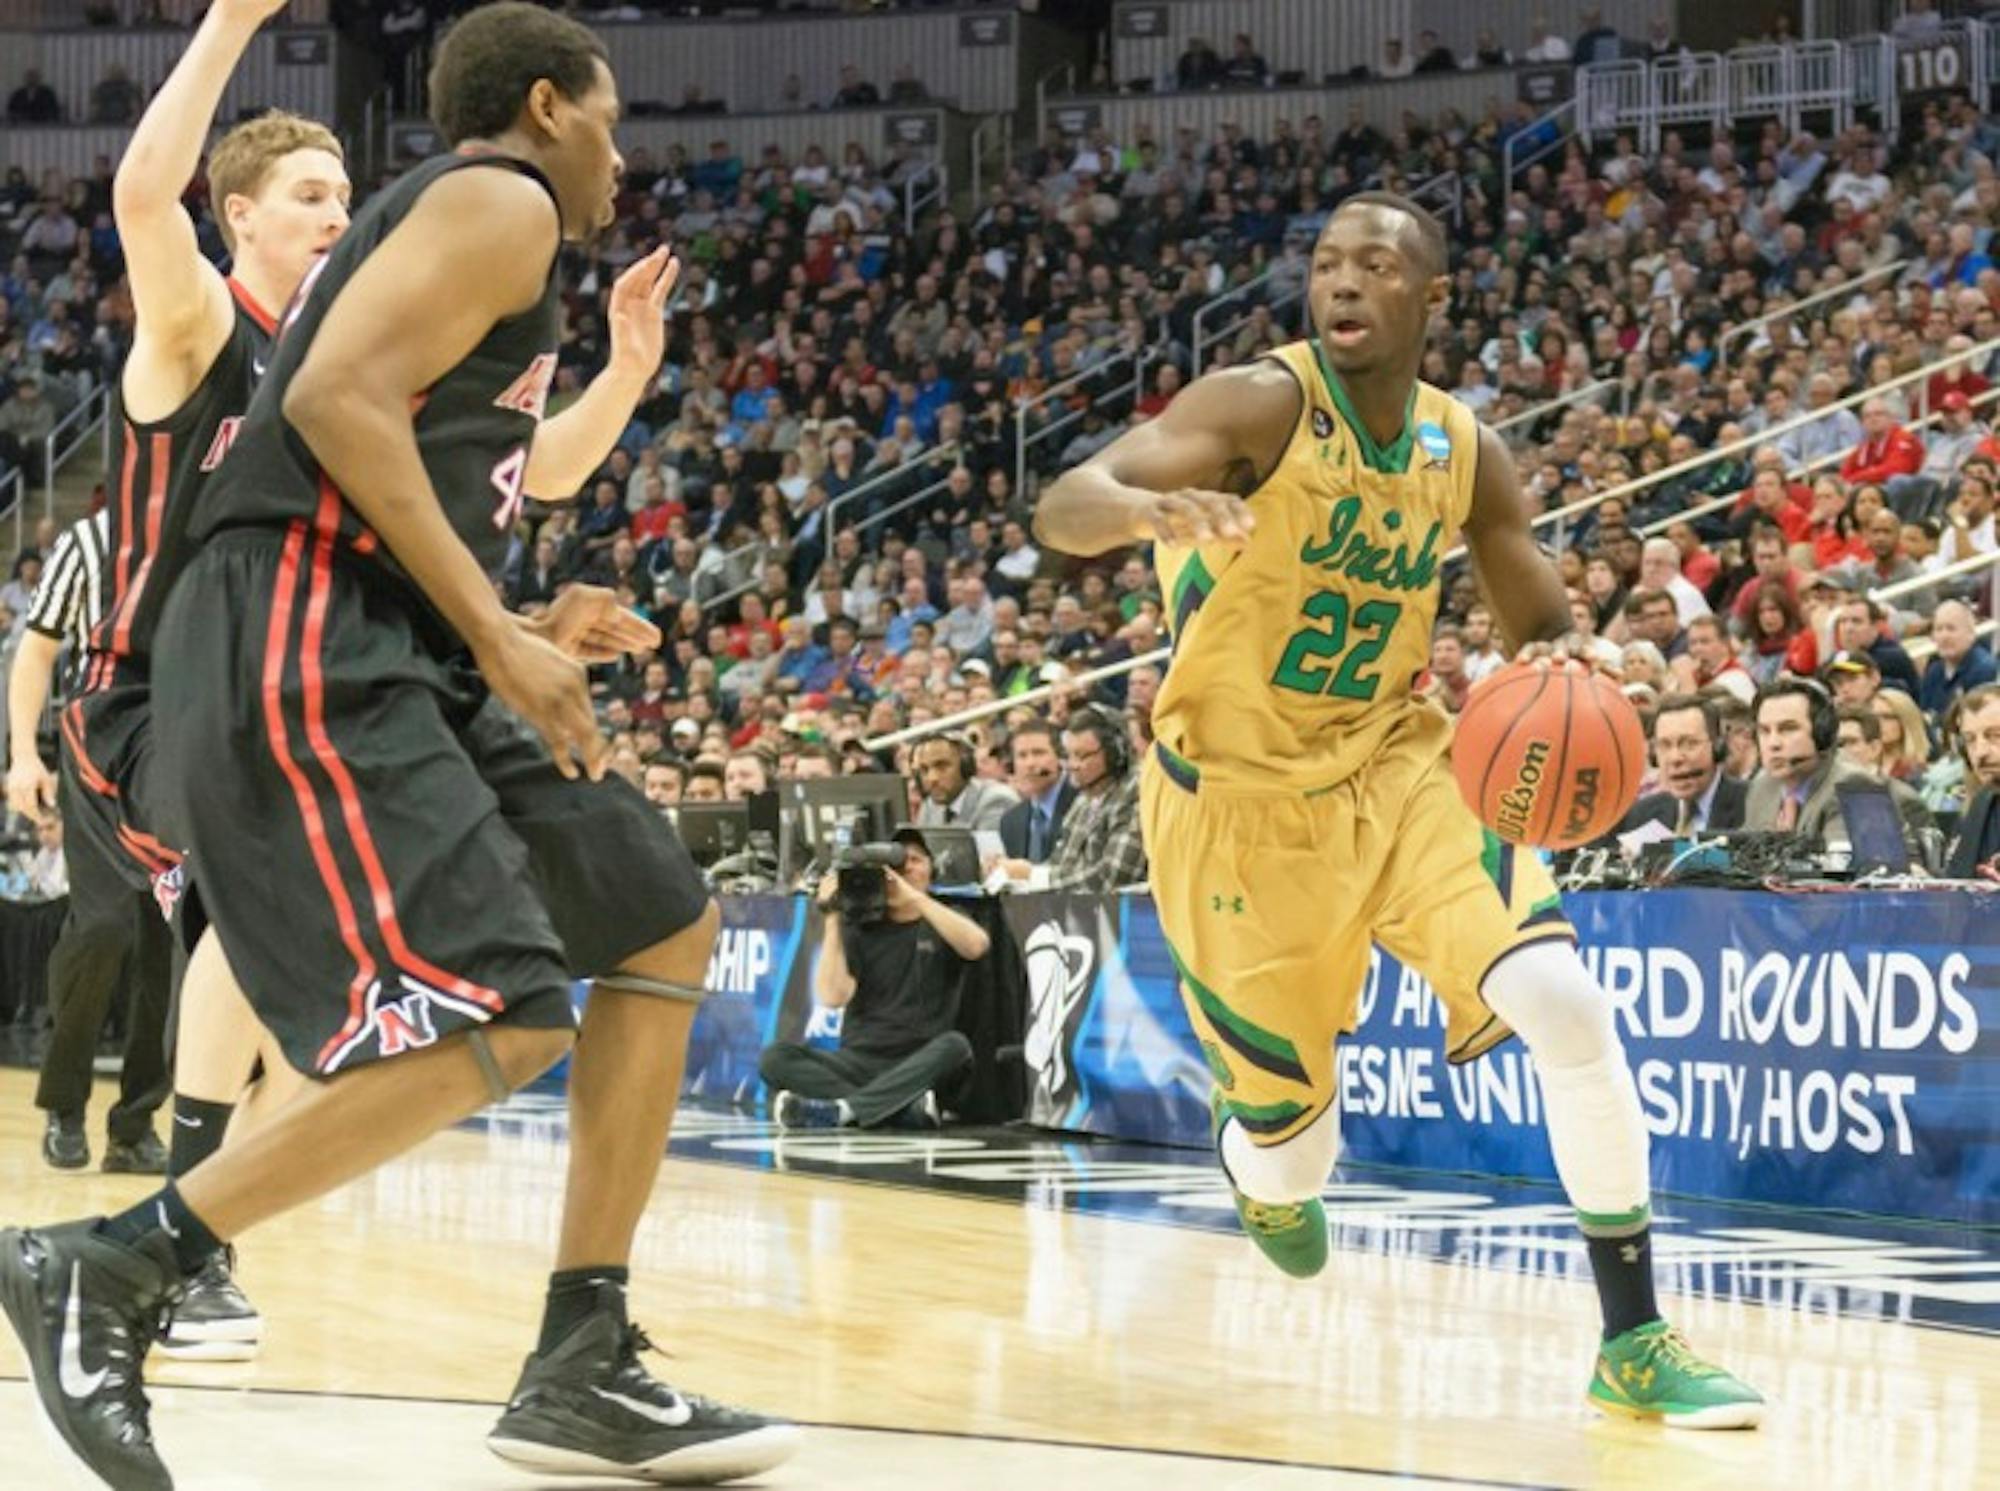 Irish senior guard Jerian Grant drives around a Northeastern defender during Notre Dame's 69-65 win to advance to the third round of the NCAA Tournament on March 19.